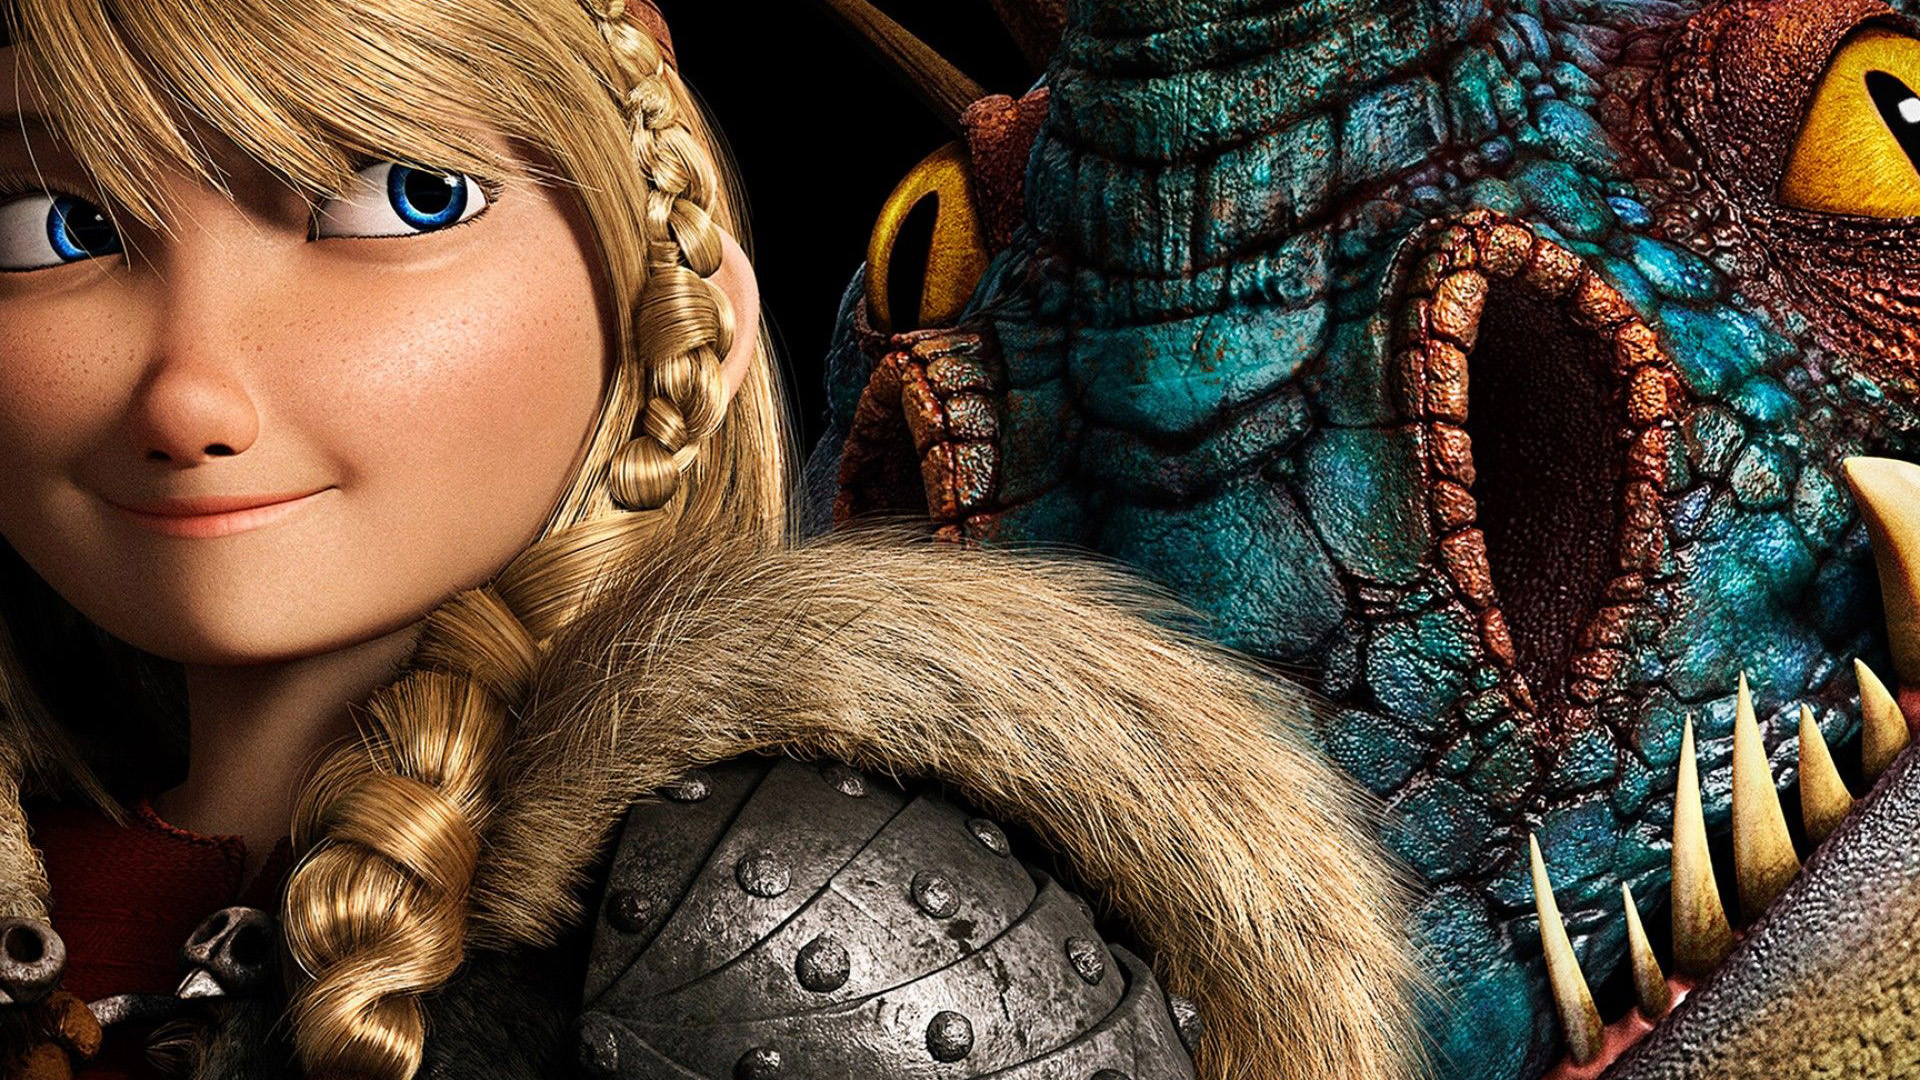 movie, how to train your dragon 2, astrid (how to train your dragon), how to train your dragon